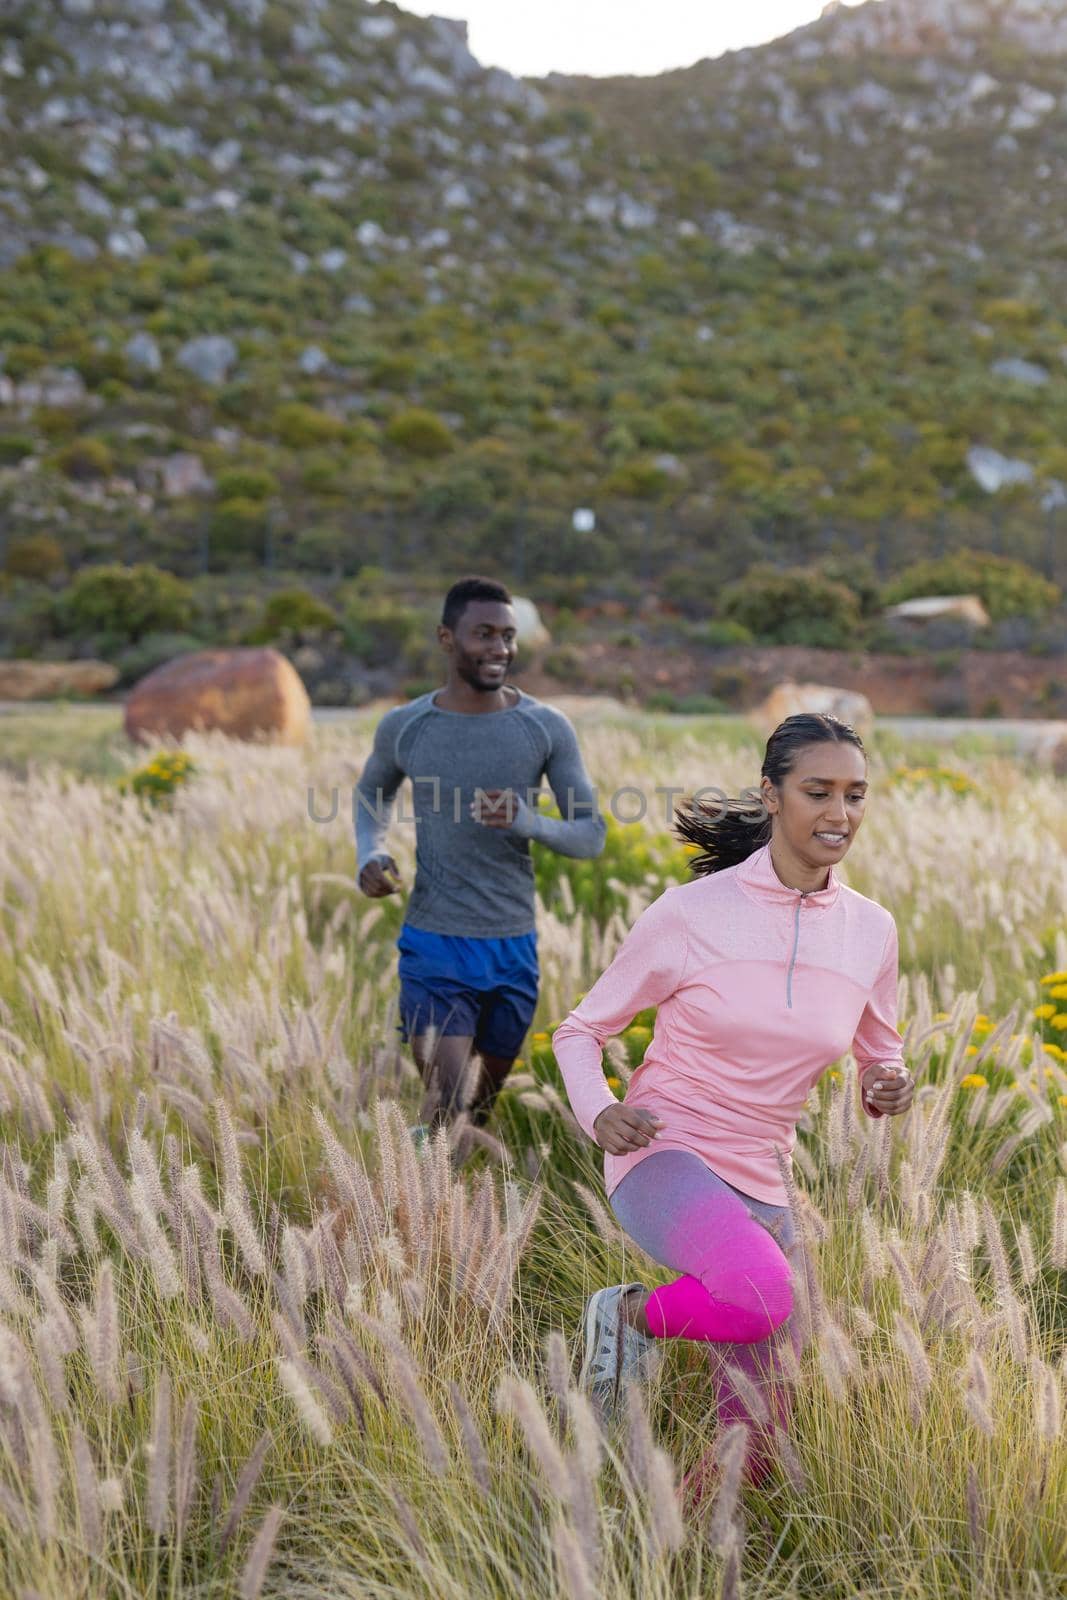 Fit african american couple in sportswear running through tall grass. healthy lifestyle, exercising in nature.